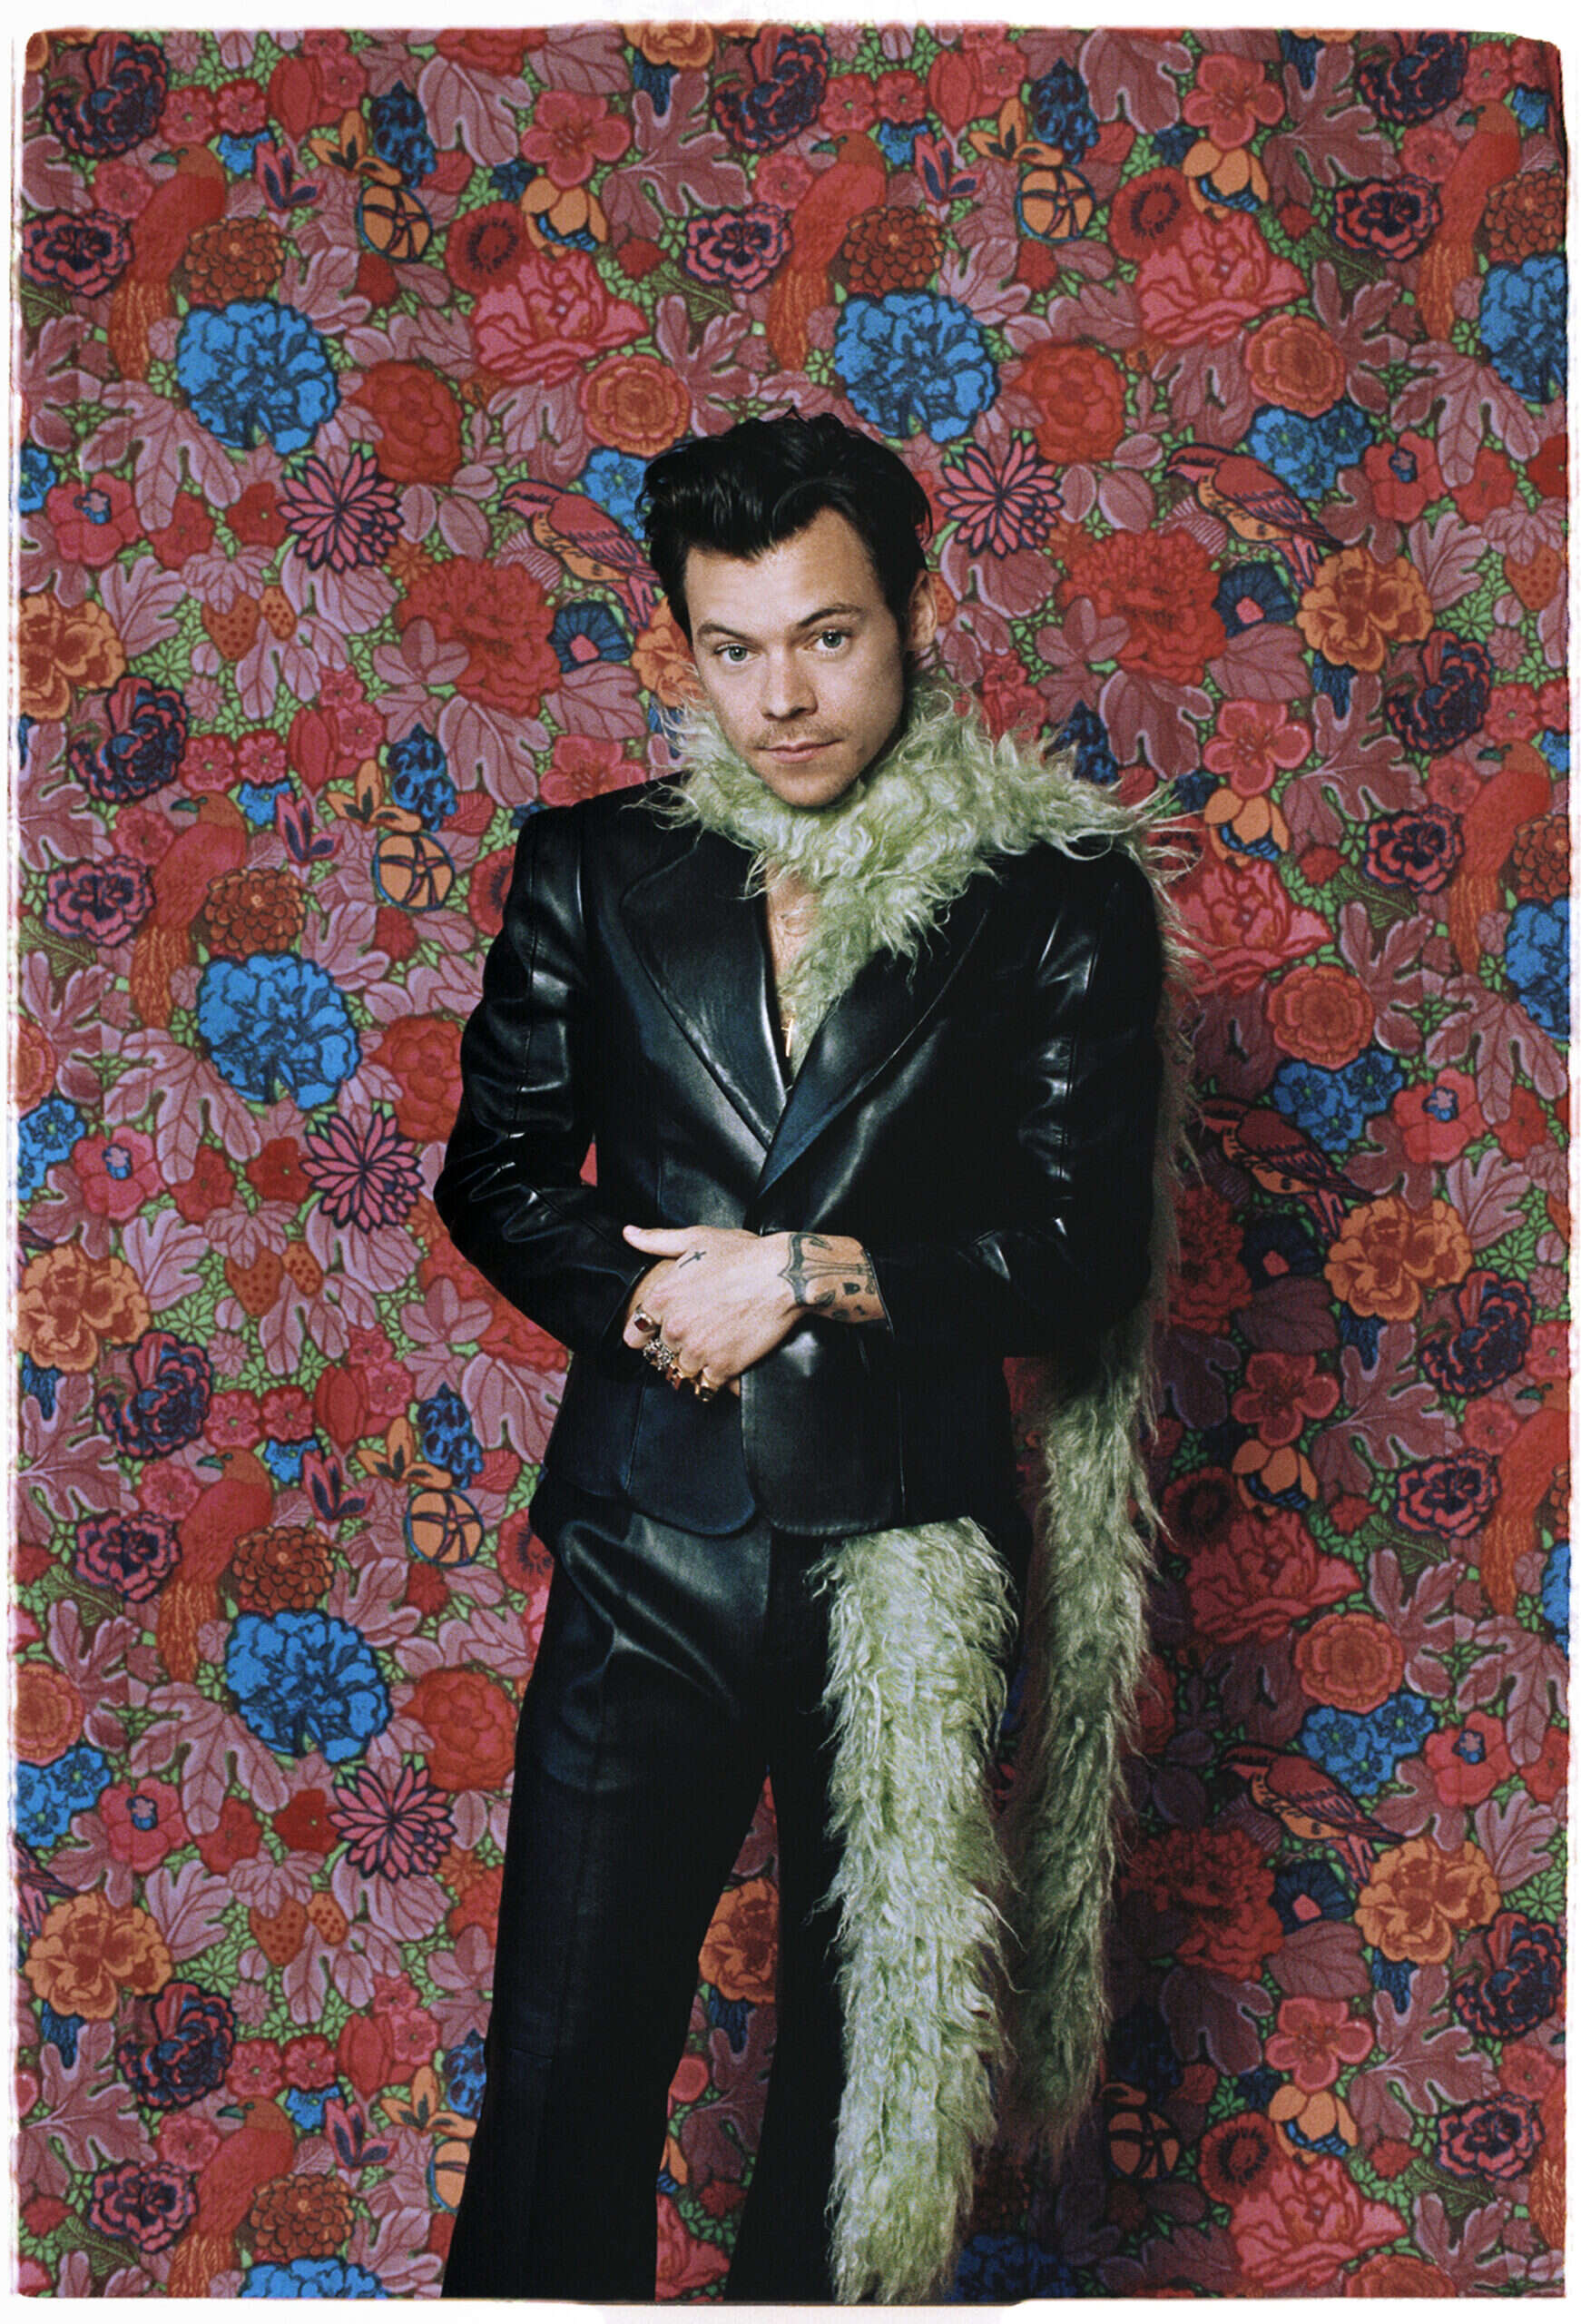 Sill Peck Sexi Video Pron Blood - Harry Styles and the paradox of male sexuality - New Statesman